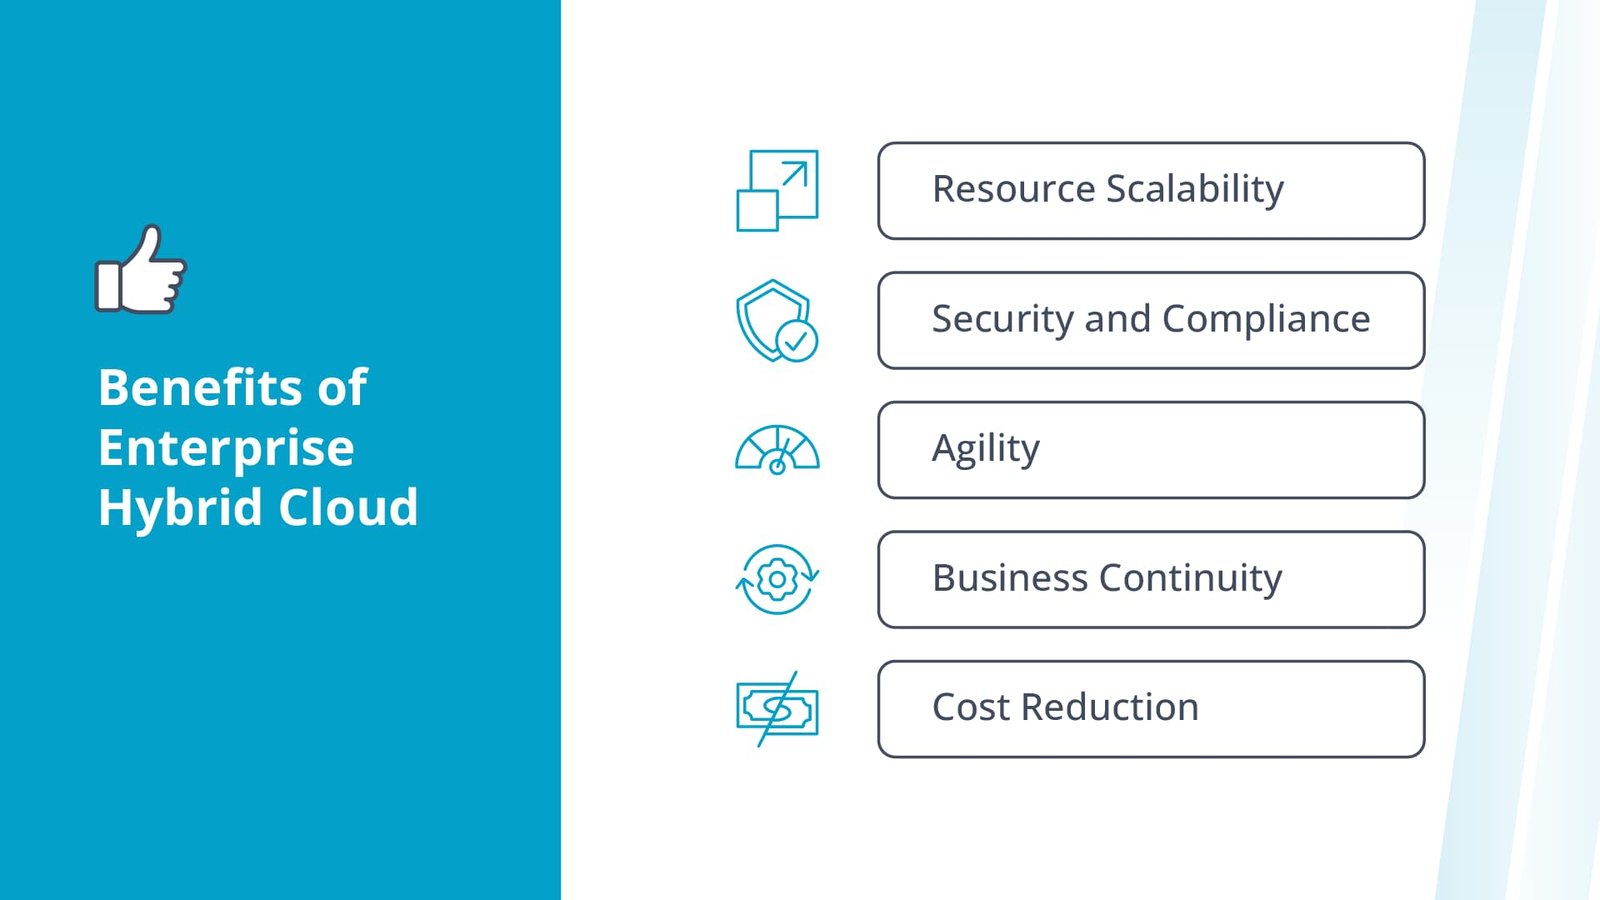 By opting for hybrid clouds, enterprises can unlock many benefits, such as scalability and cost-effectiveness.